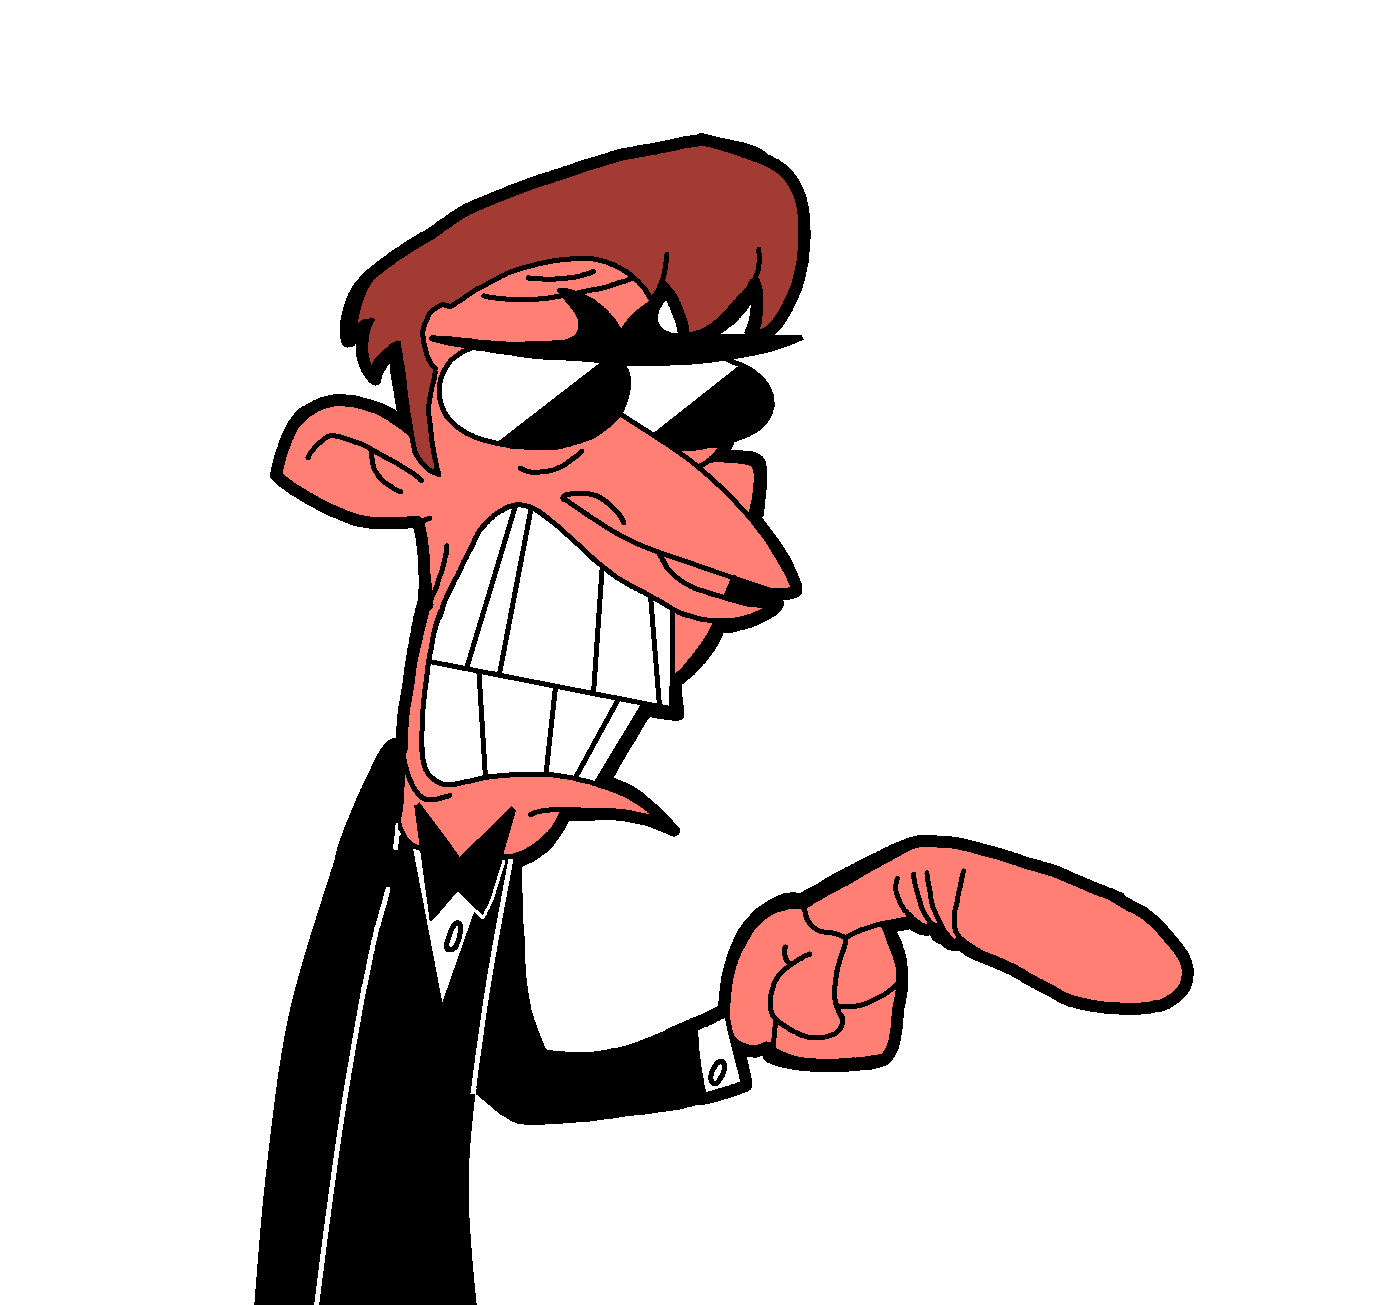 Man cartoon image group. Driver clipart angry